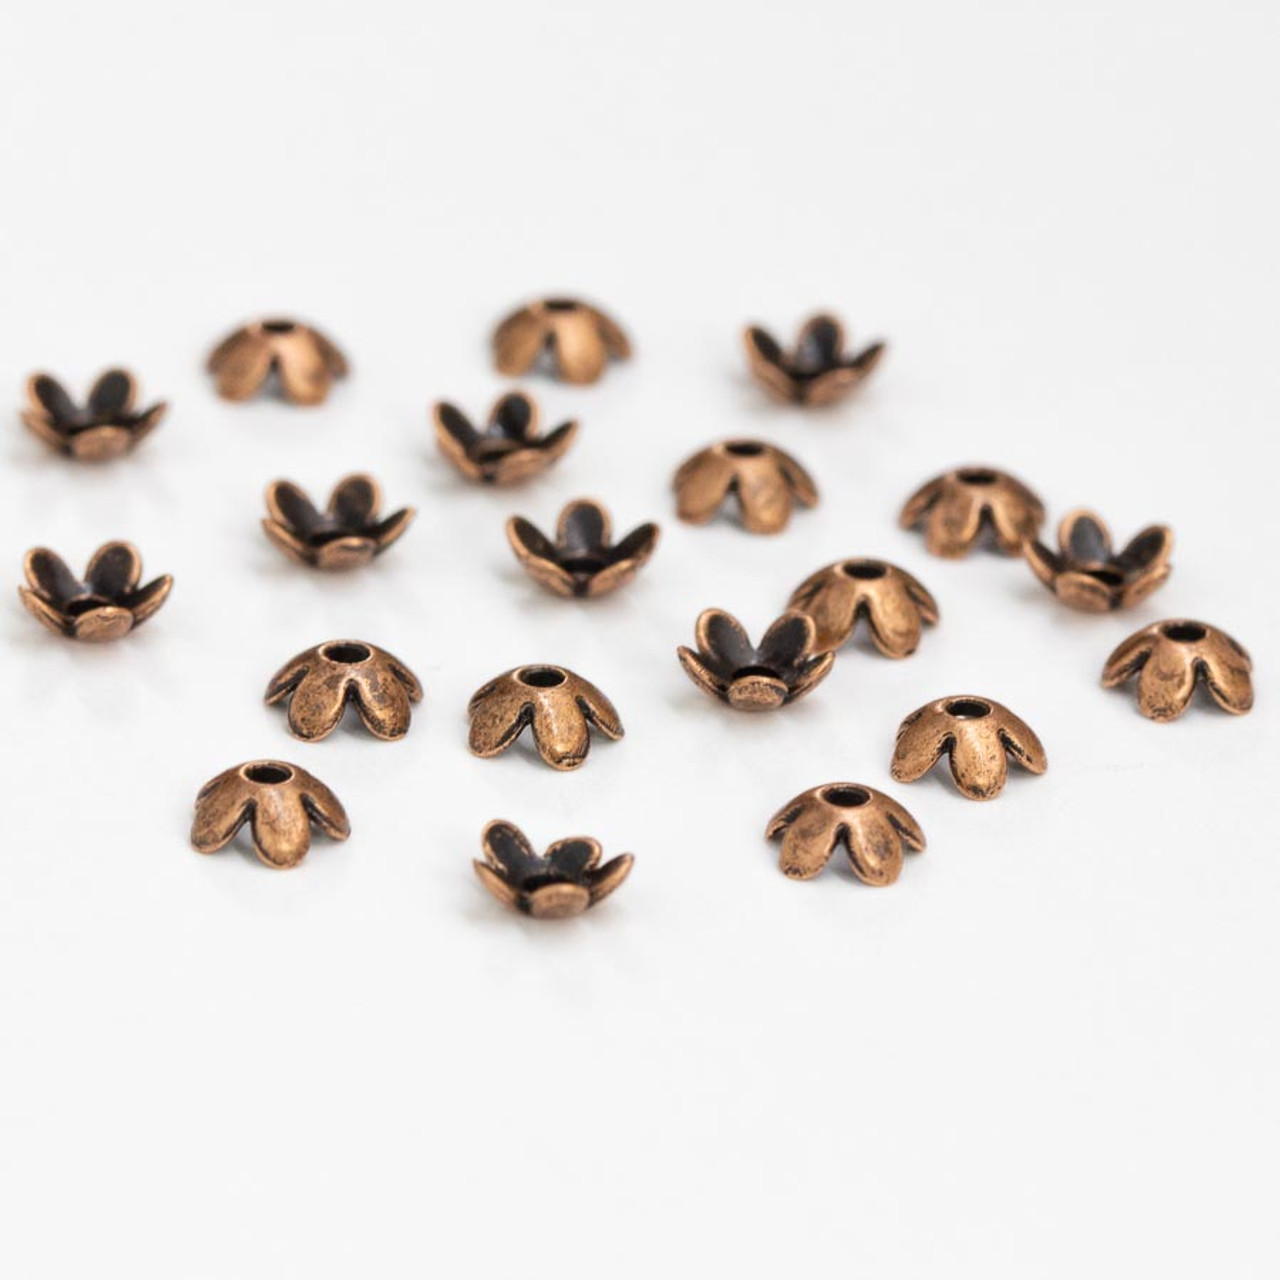 TIBETAN STYLE BEAD CAPS 6mm Antique Copper Plated (Pack of 20)